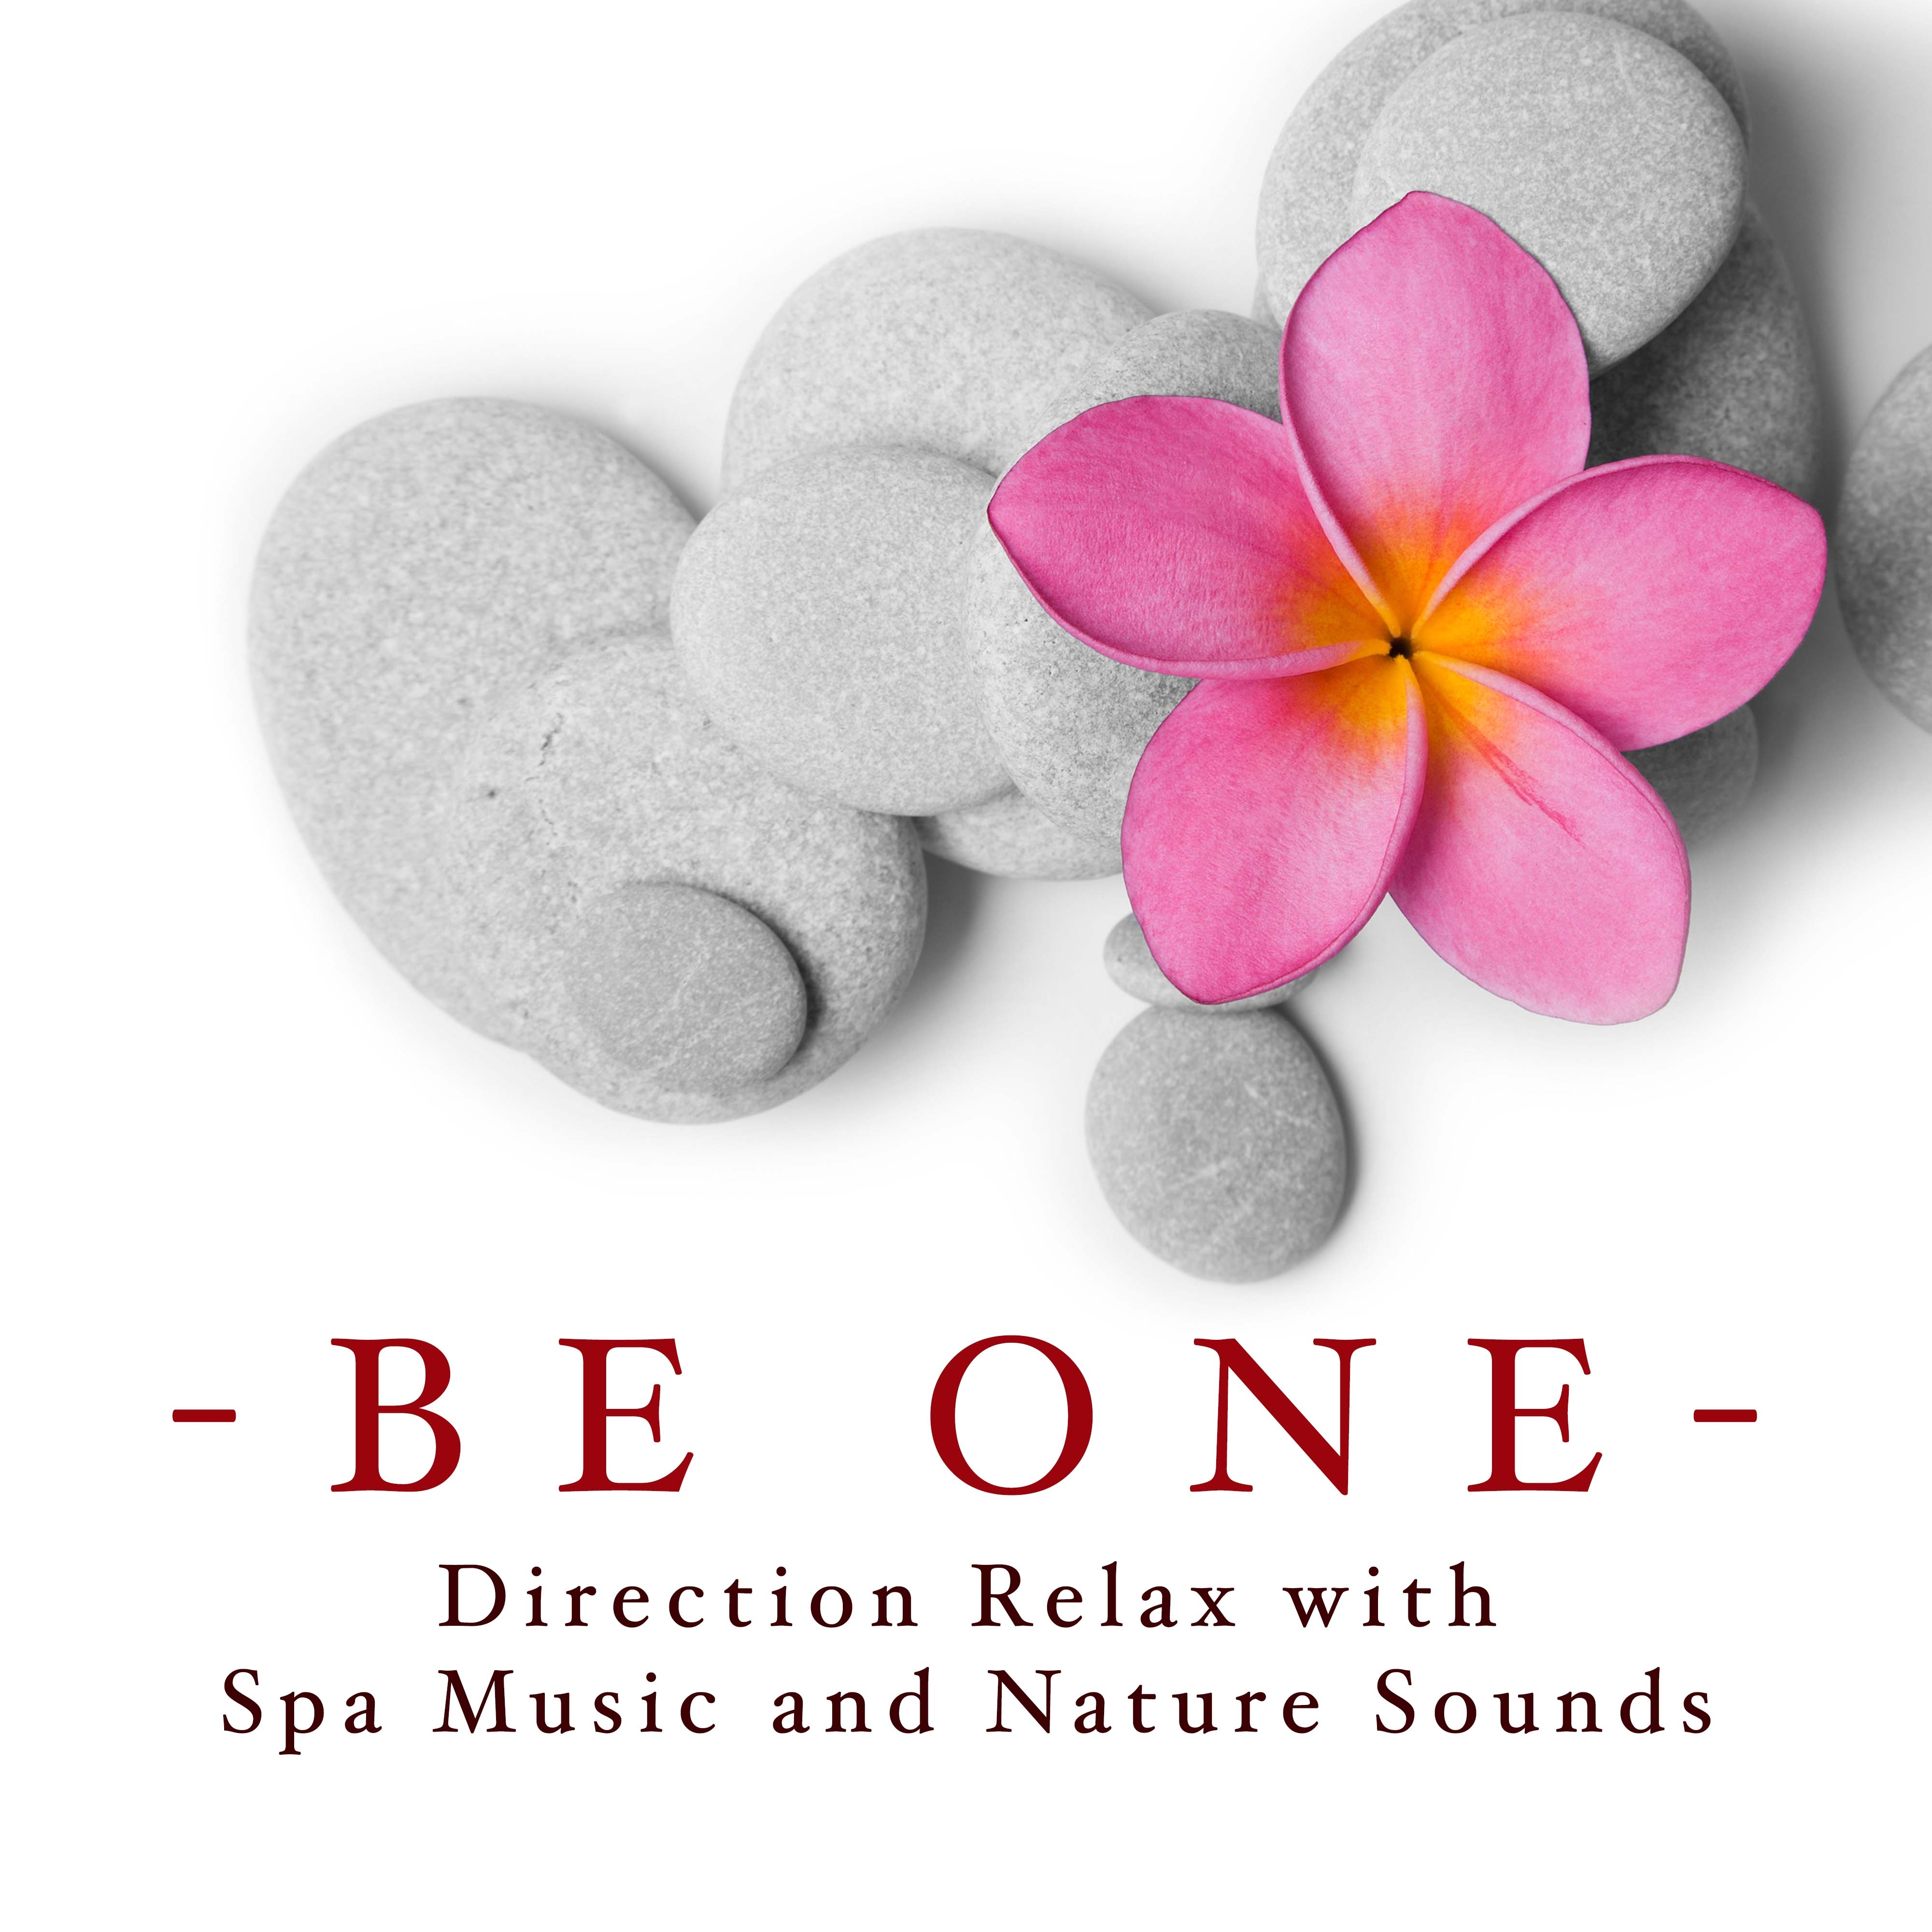 Be One - Direction Relax with Spa Music and Nature Sounds